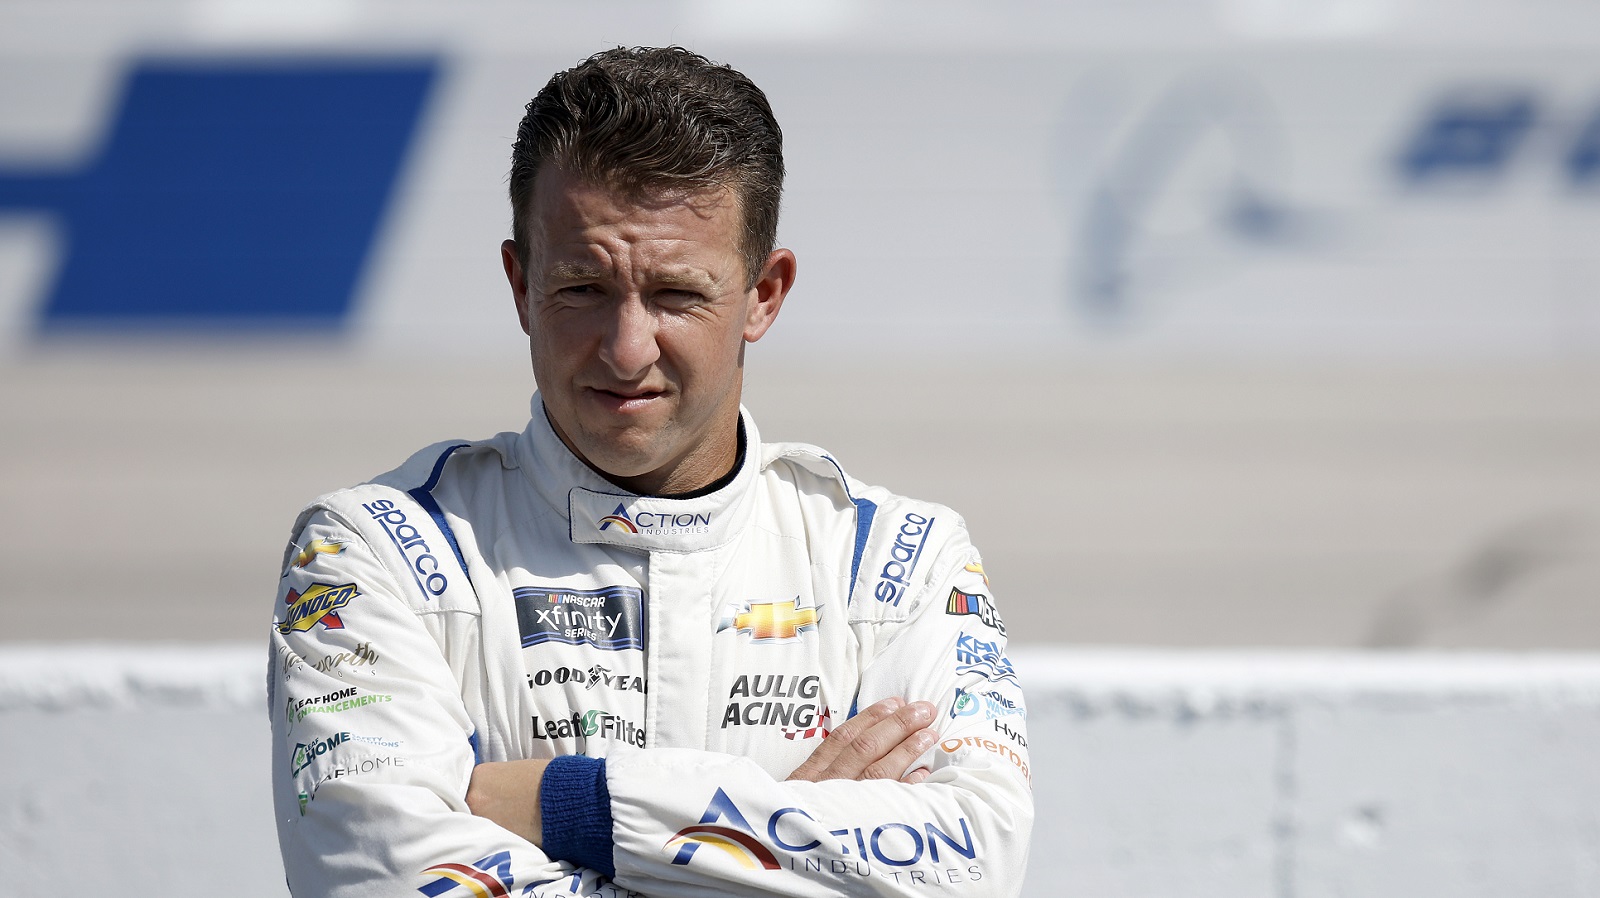 AJ Allmendinger looks on during qualifying for the NASCAR Xfinity Series Sport Clips Haircuts VFW Help A Hero 200 at Darlington Raceway on Sept. 3, 2022. | Jared C. Tilton/Getty Images